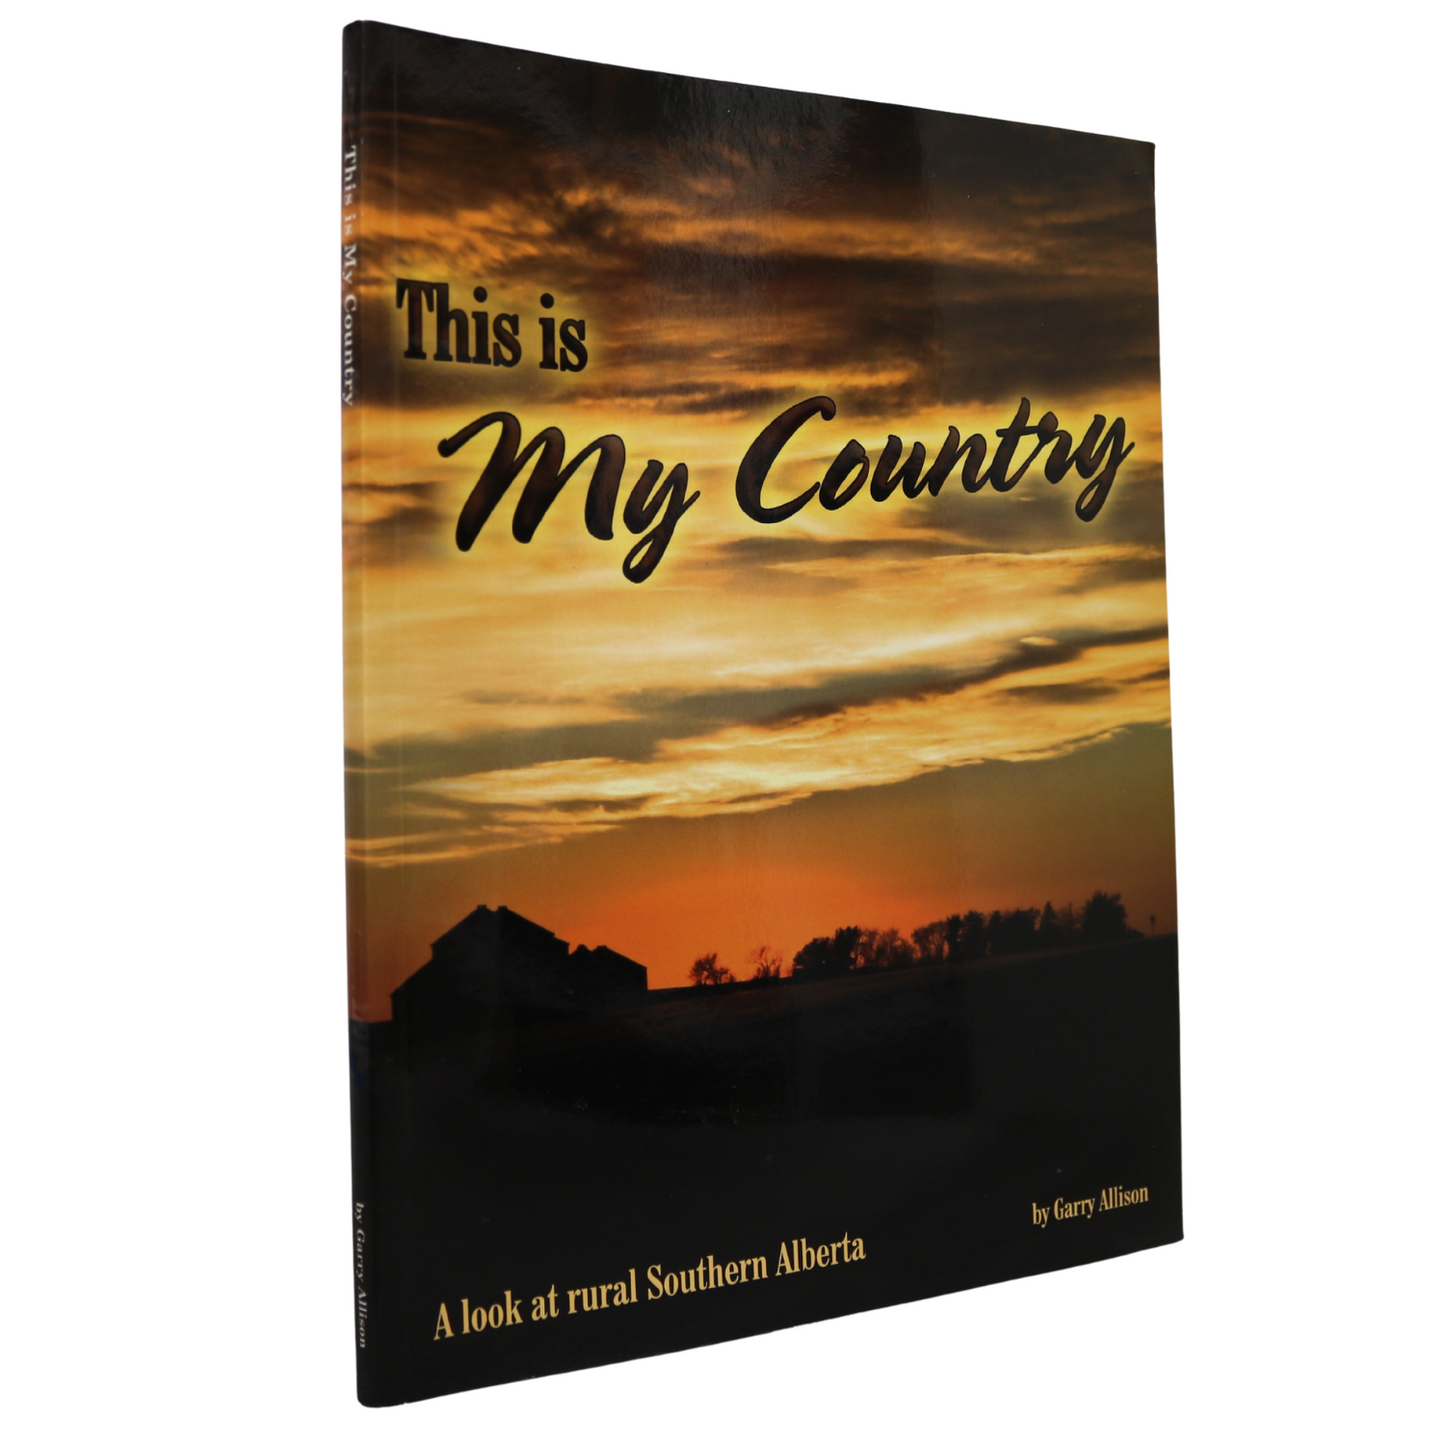 My Country Rural Southern Alberta Gary Allison Canada Canadian History Book